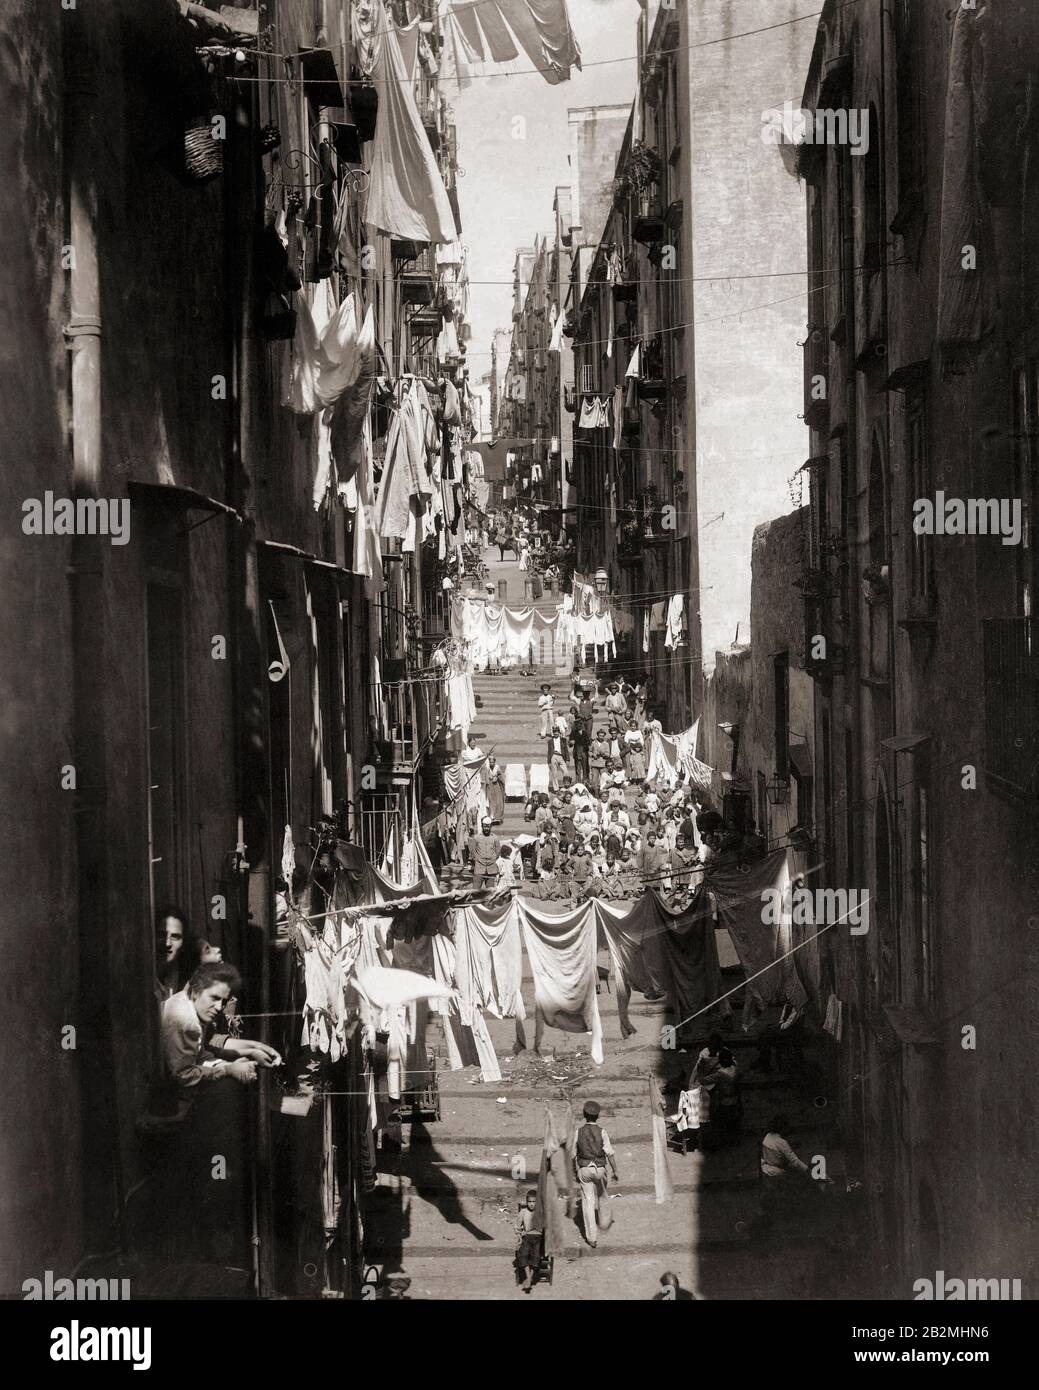 Via Pallonetto S. Lucia in Naples, Italy, in the late 19th century.  After a work by German photographer Giorgio Sommer, 1834 -1914 Stock Photo